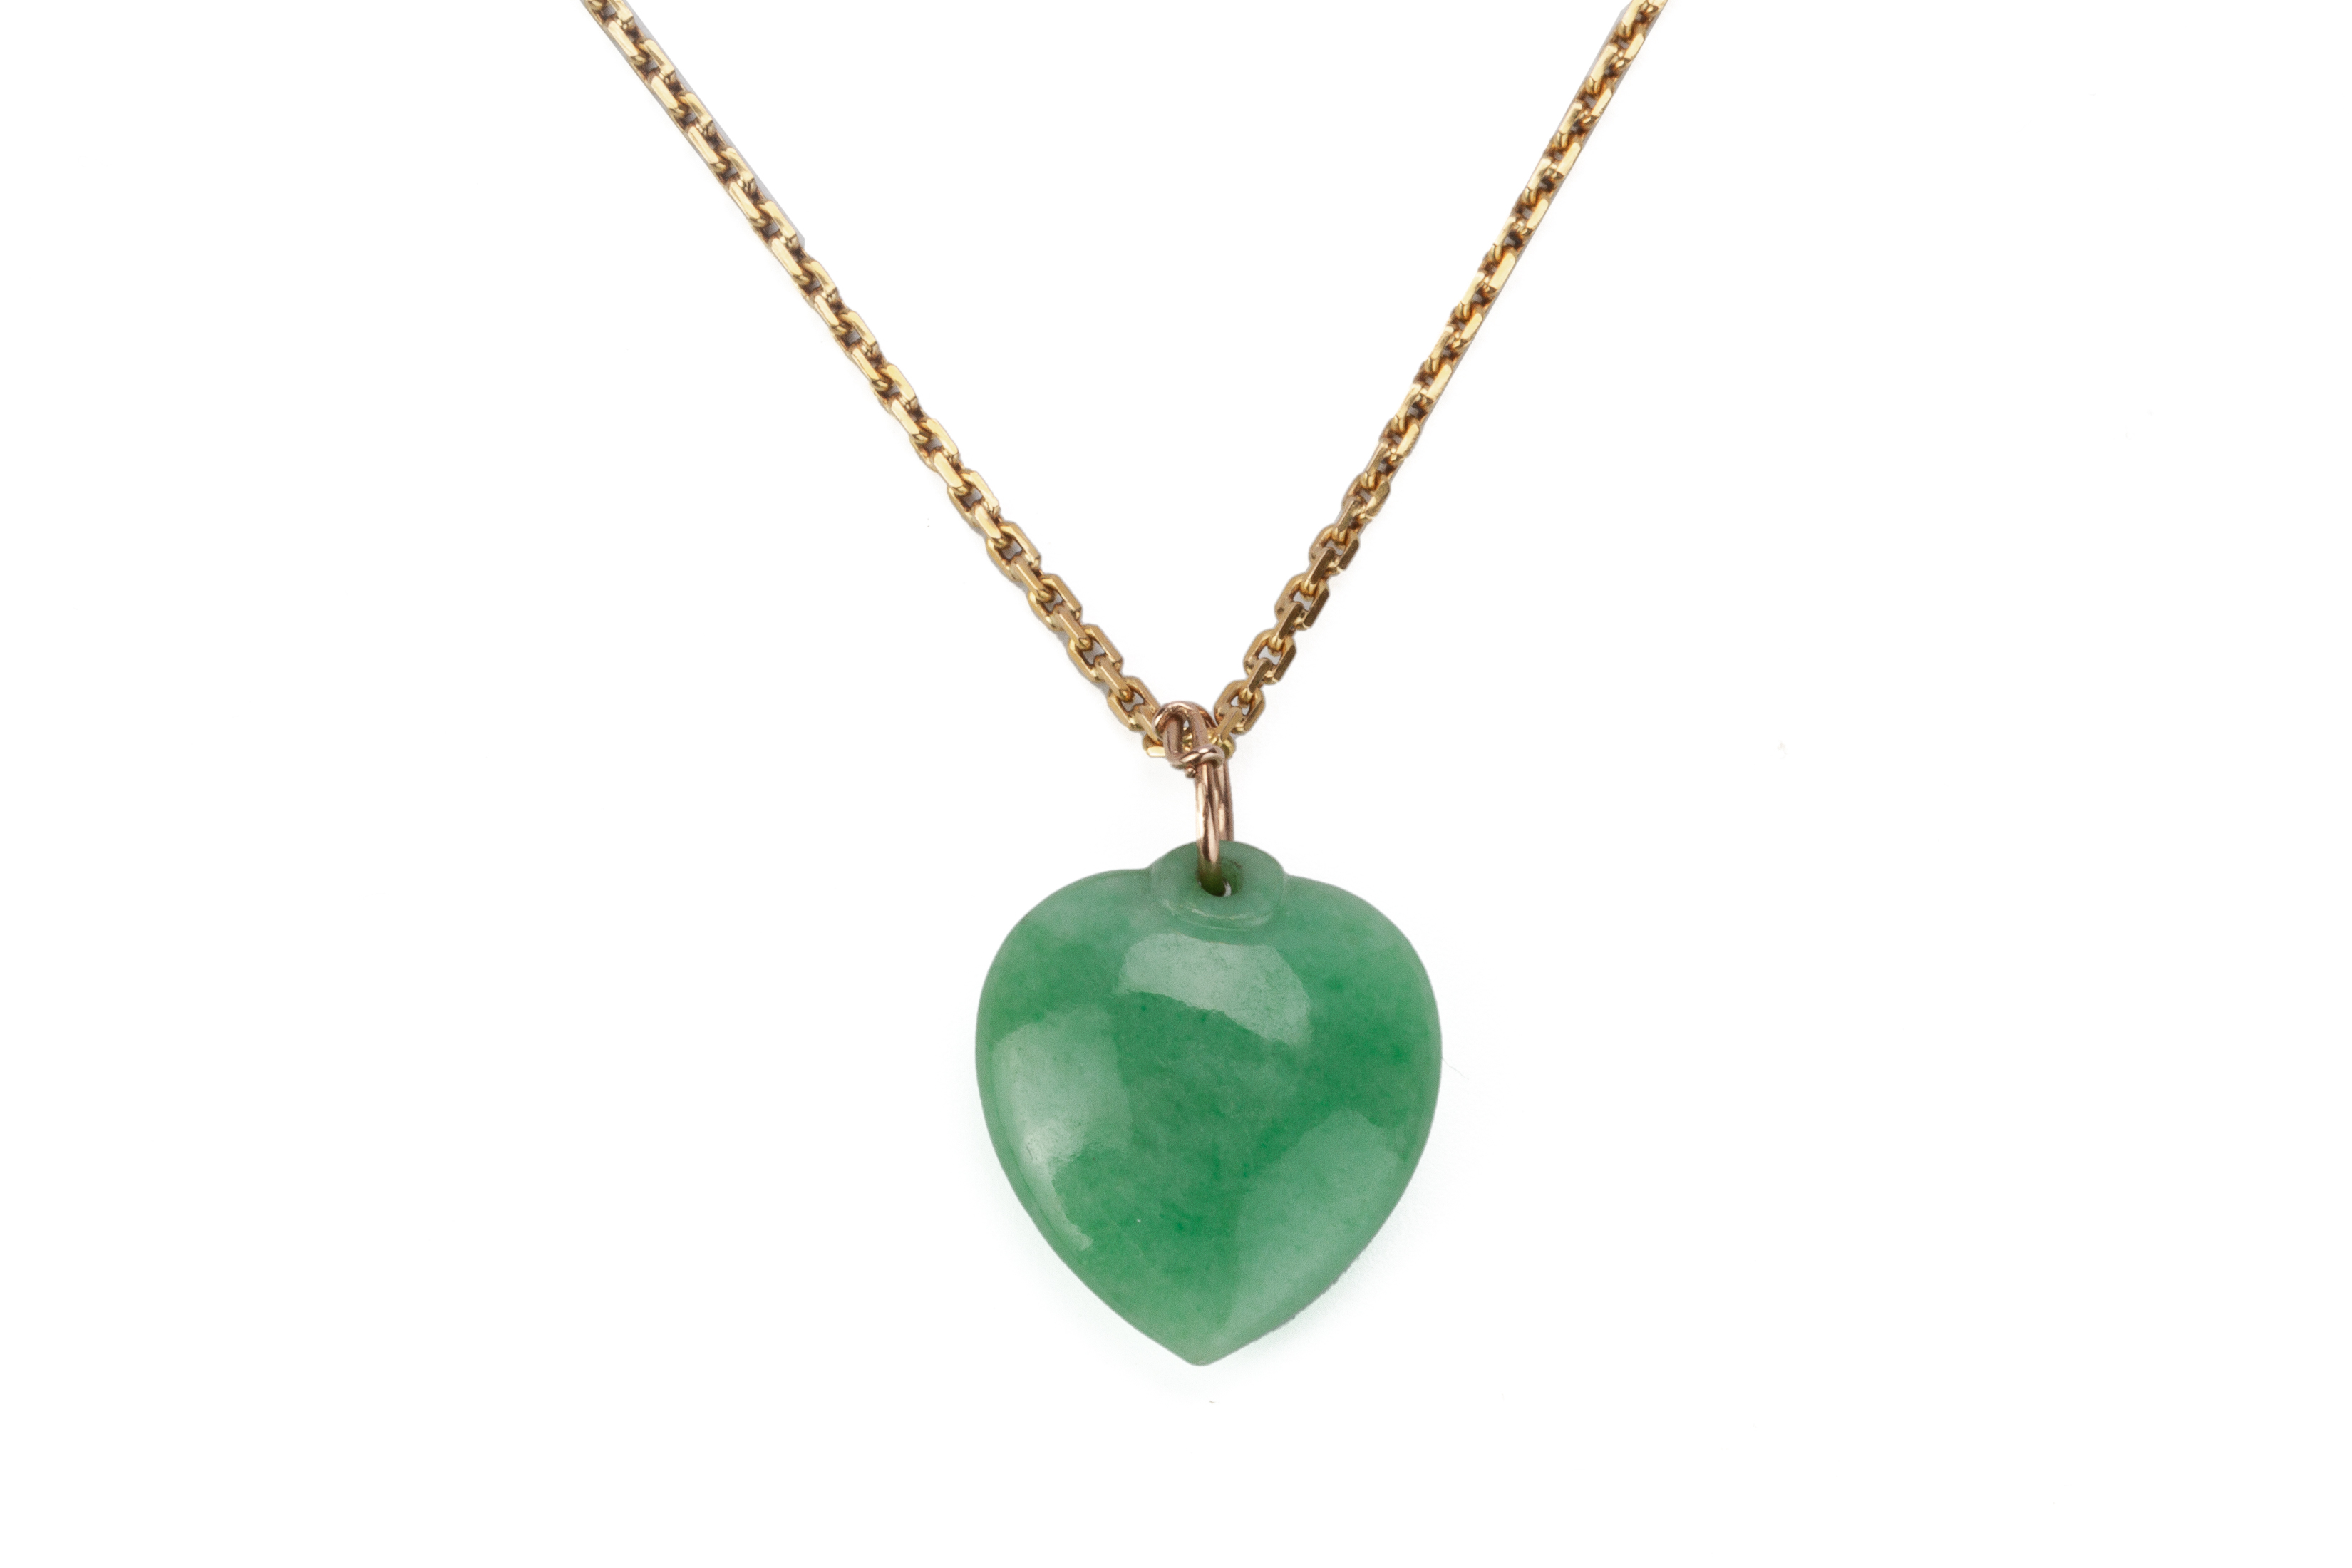 A HEART-SHAPED JADE PENDANT ON CHAIN